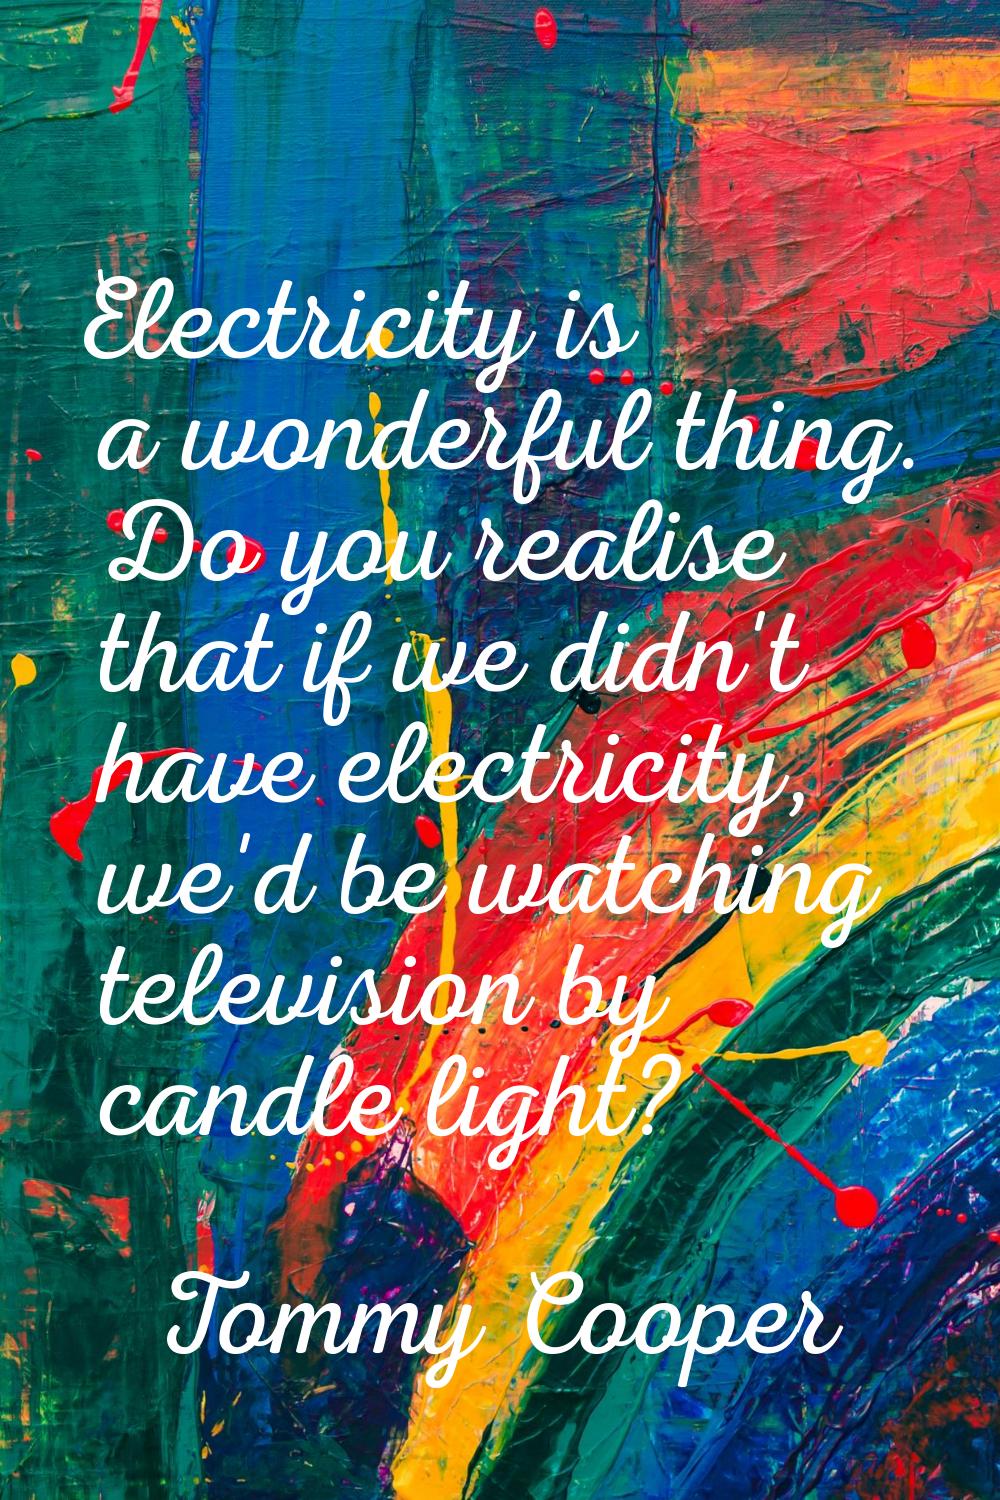 Electricity is a wonderful thing. Do you realise that if we didn't have electricity, we'd be watchi